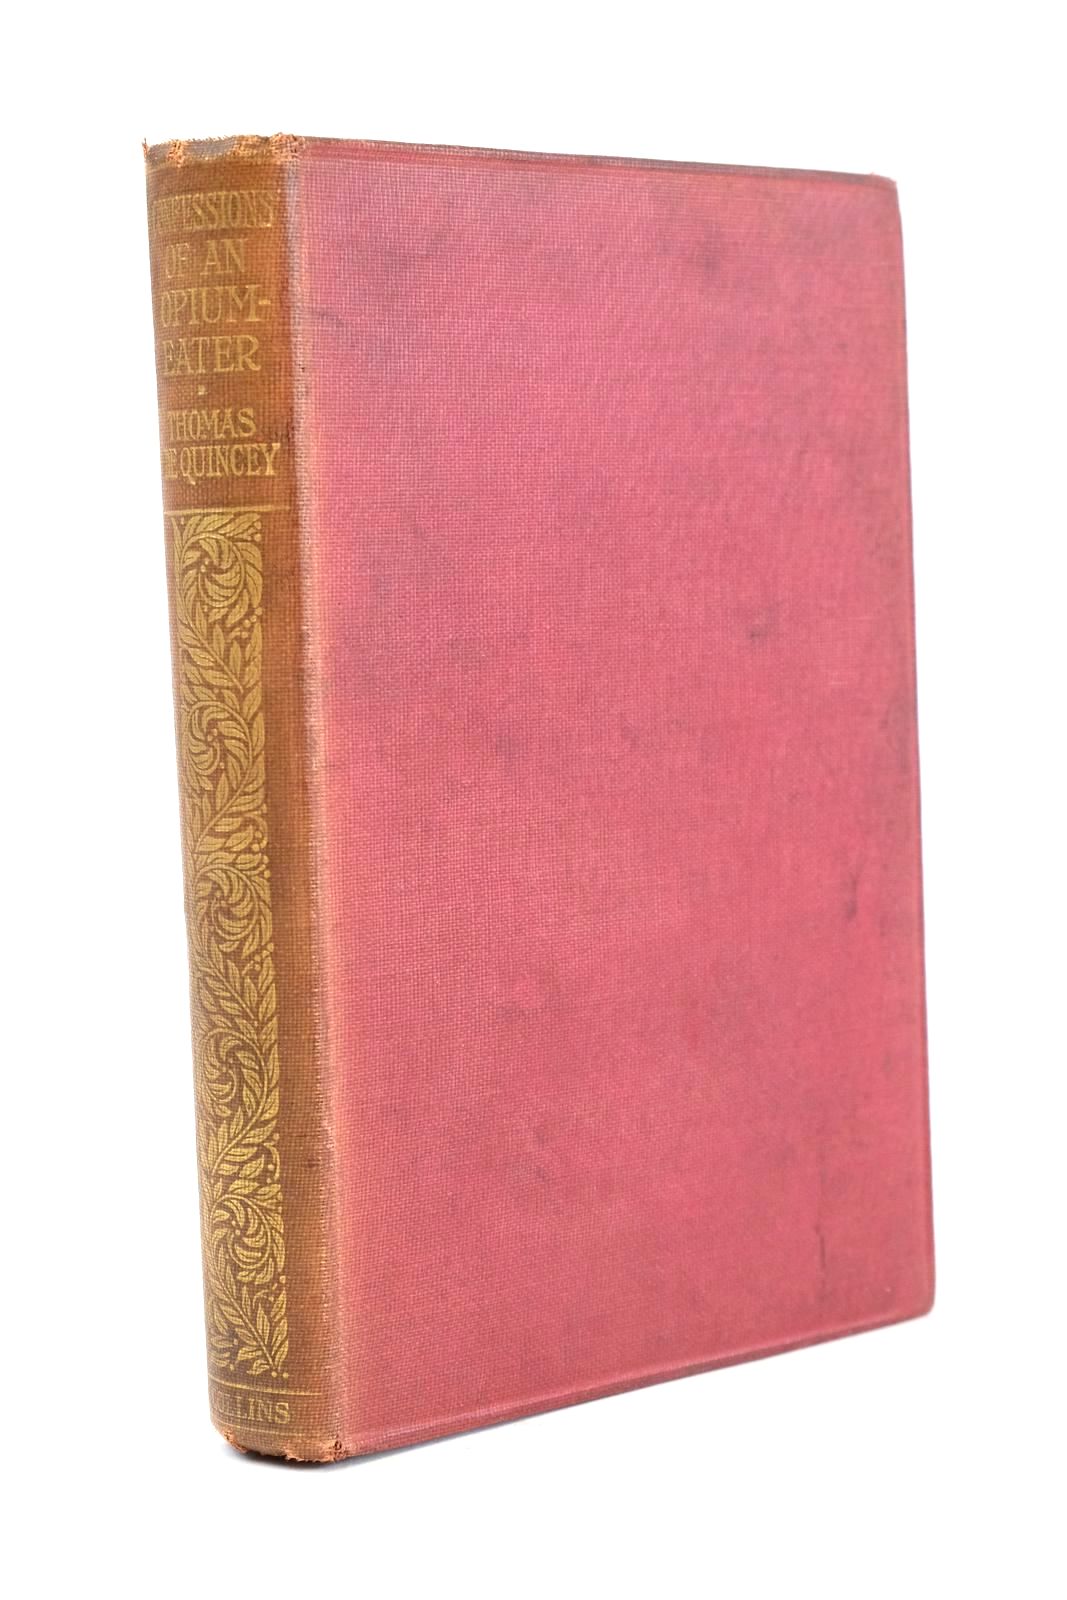 Photo of CONFESSIONS OF AN ENGLISH OPIUM-EATER written by De Quincey, Thomas illustrated by Pogany, Willy published by Collins Clear-Type Press (STOCK CODE: 1325171)  for sale by Stella & Rose's Books